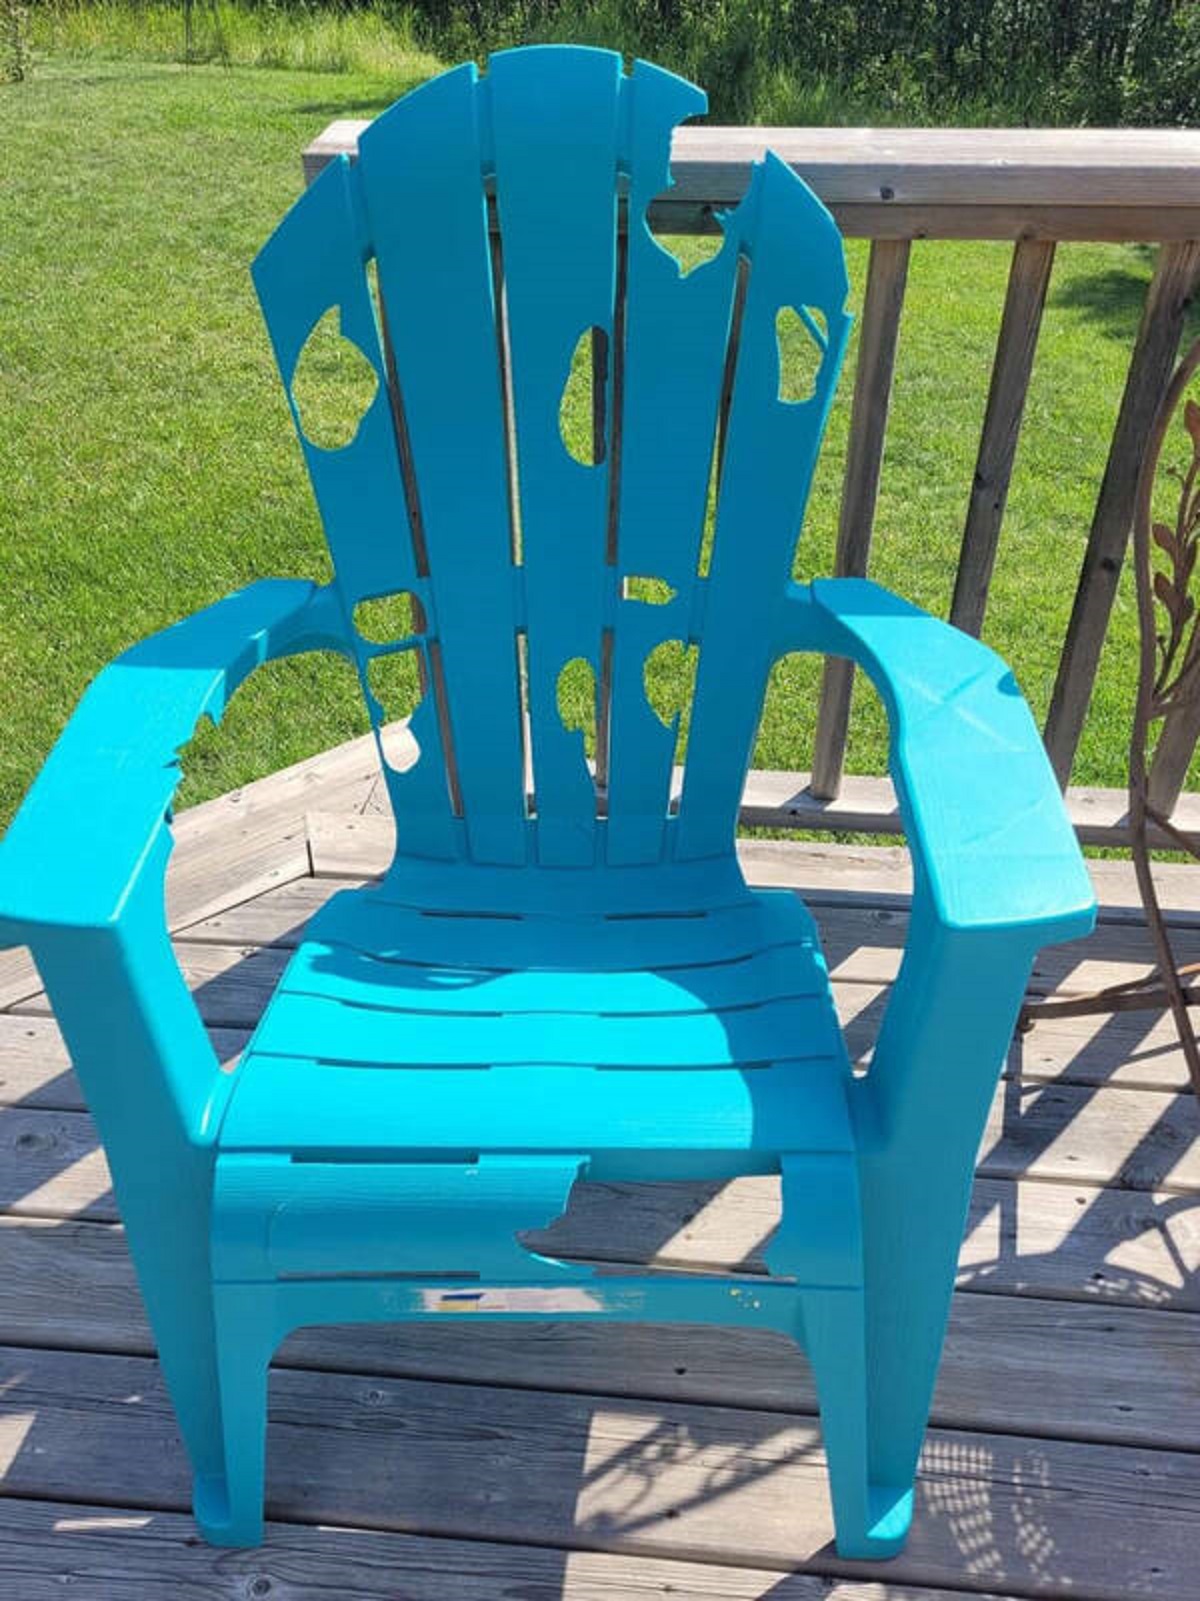 “Hail damage to my grandparents’ patio chair”